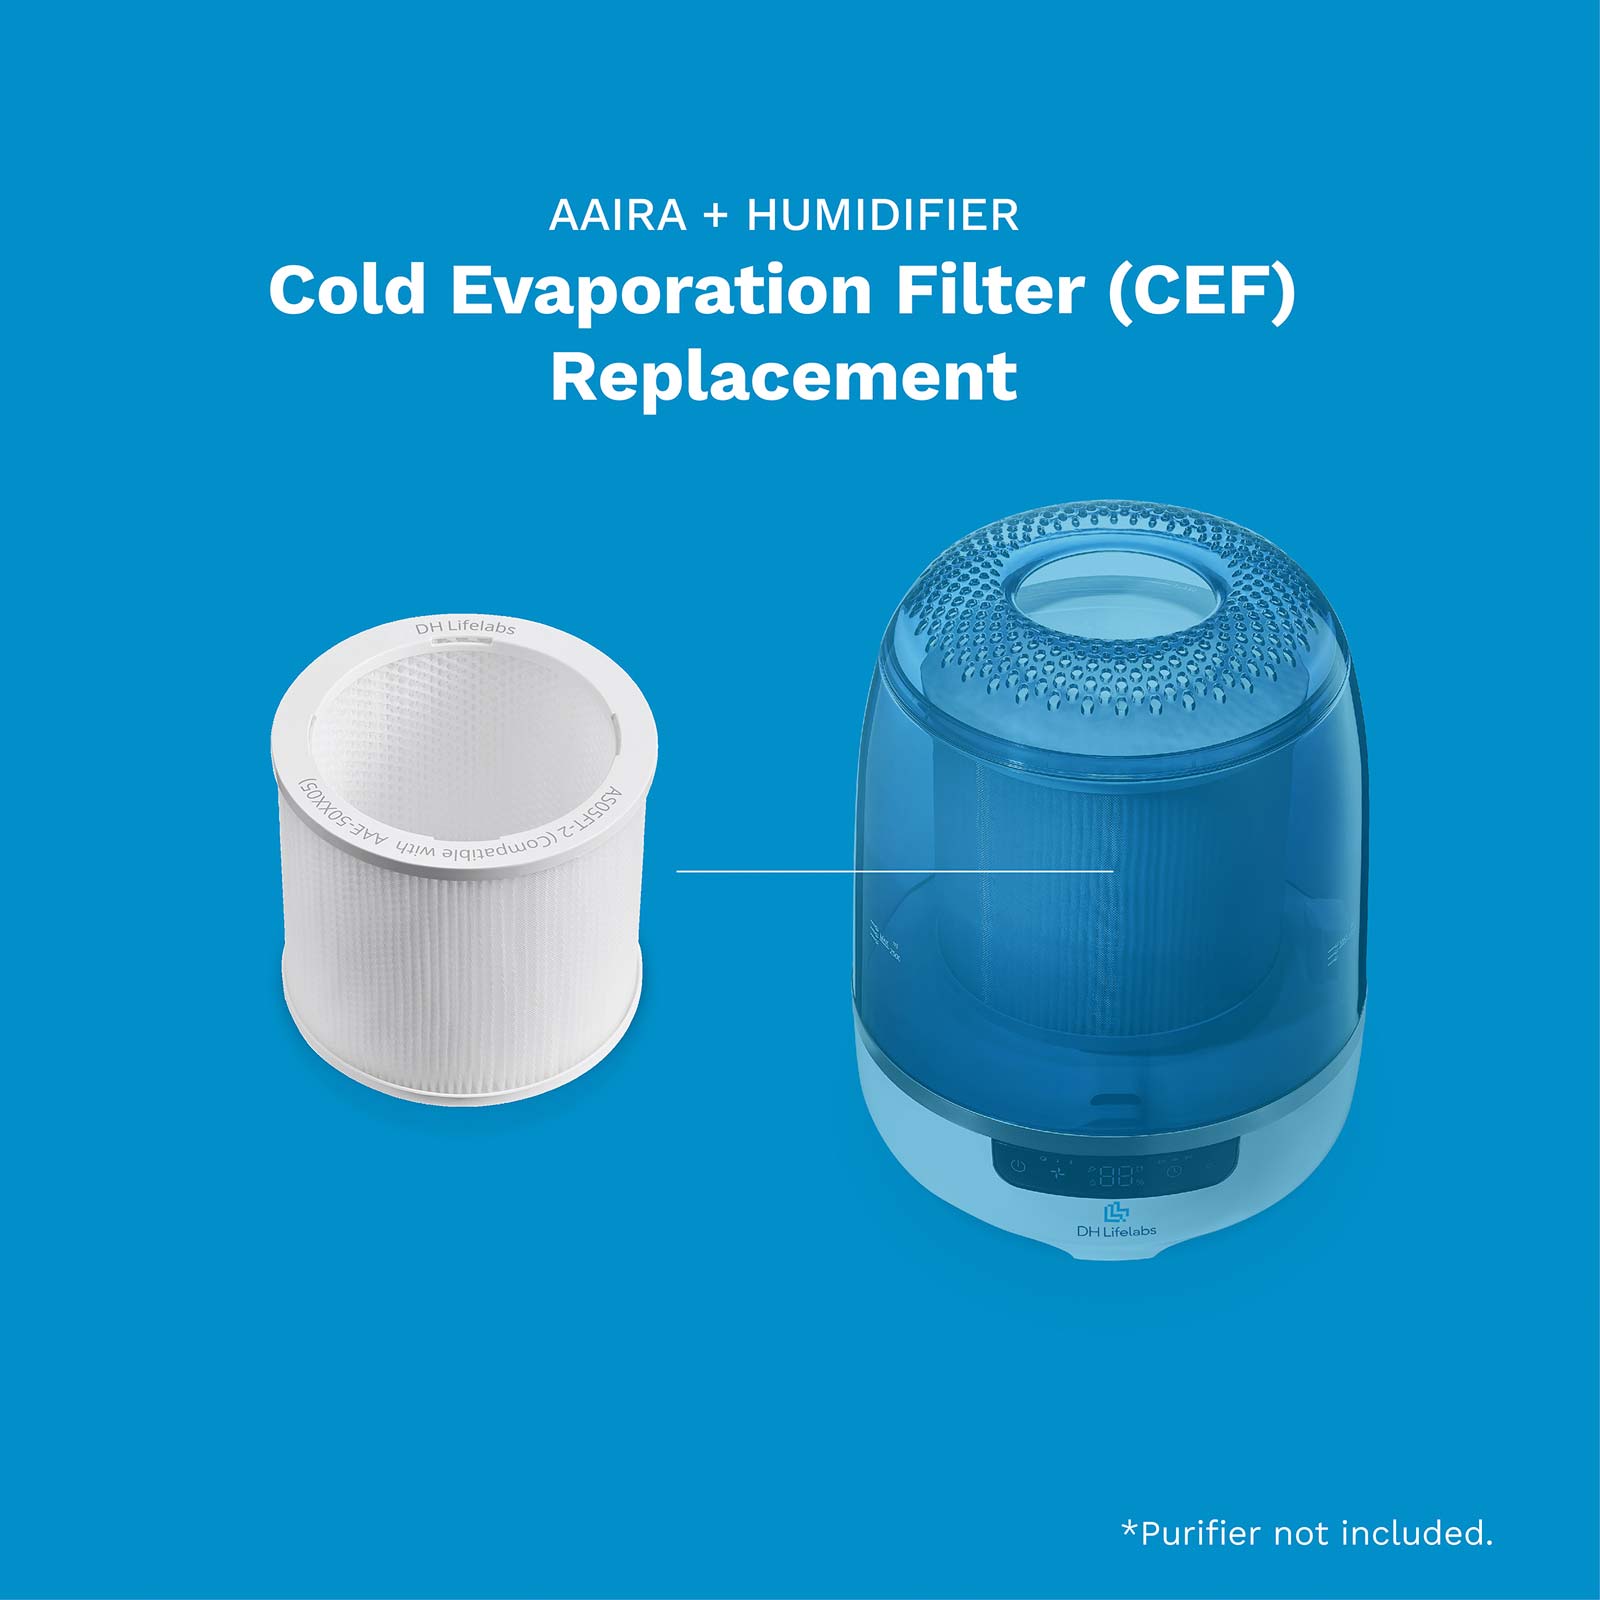 Aaira + Humidifier / Cold Evaporation Filter (CEF)